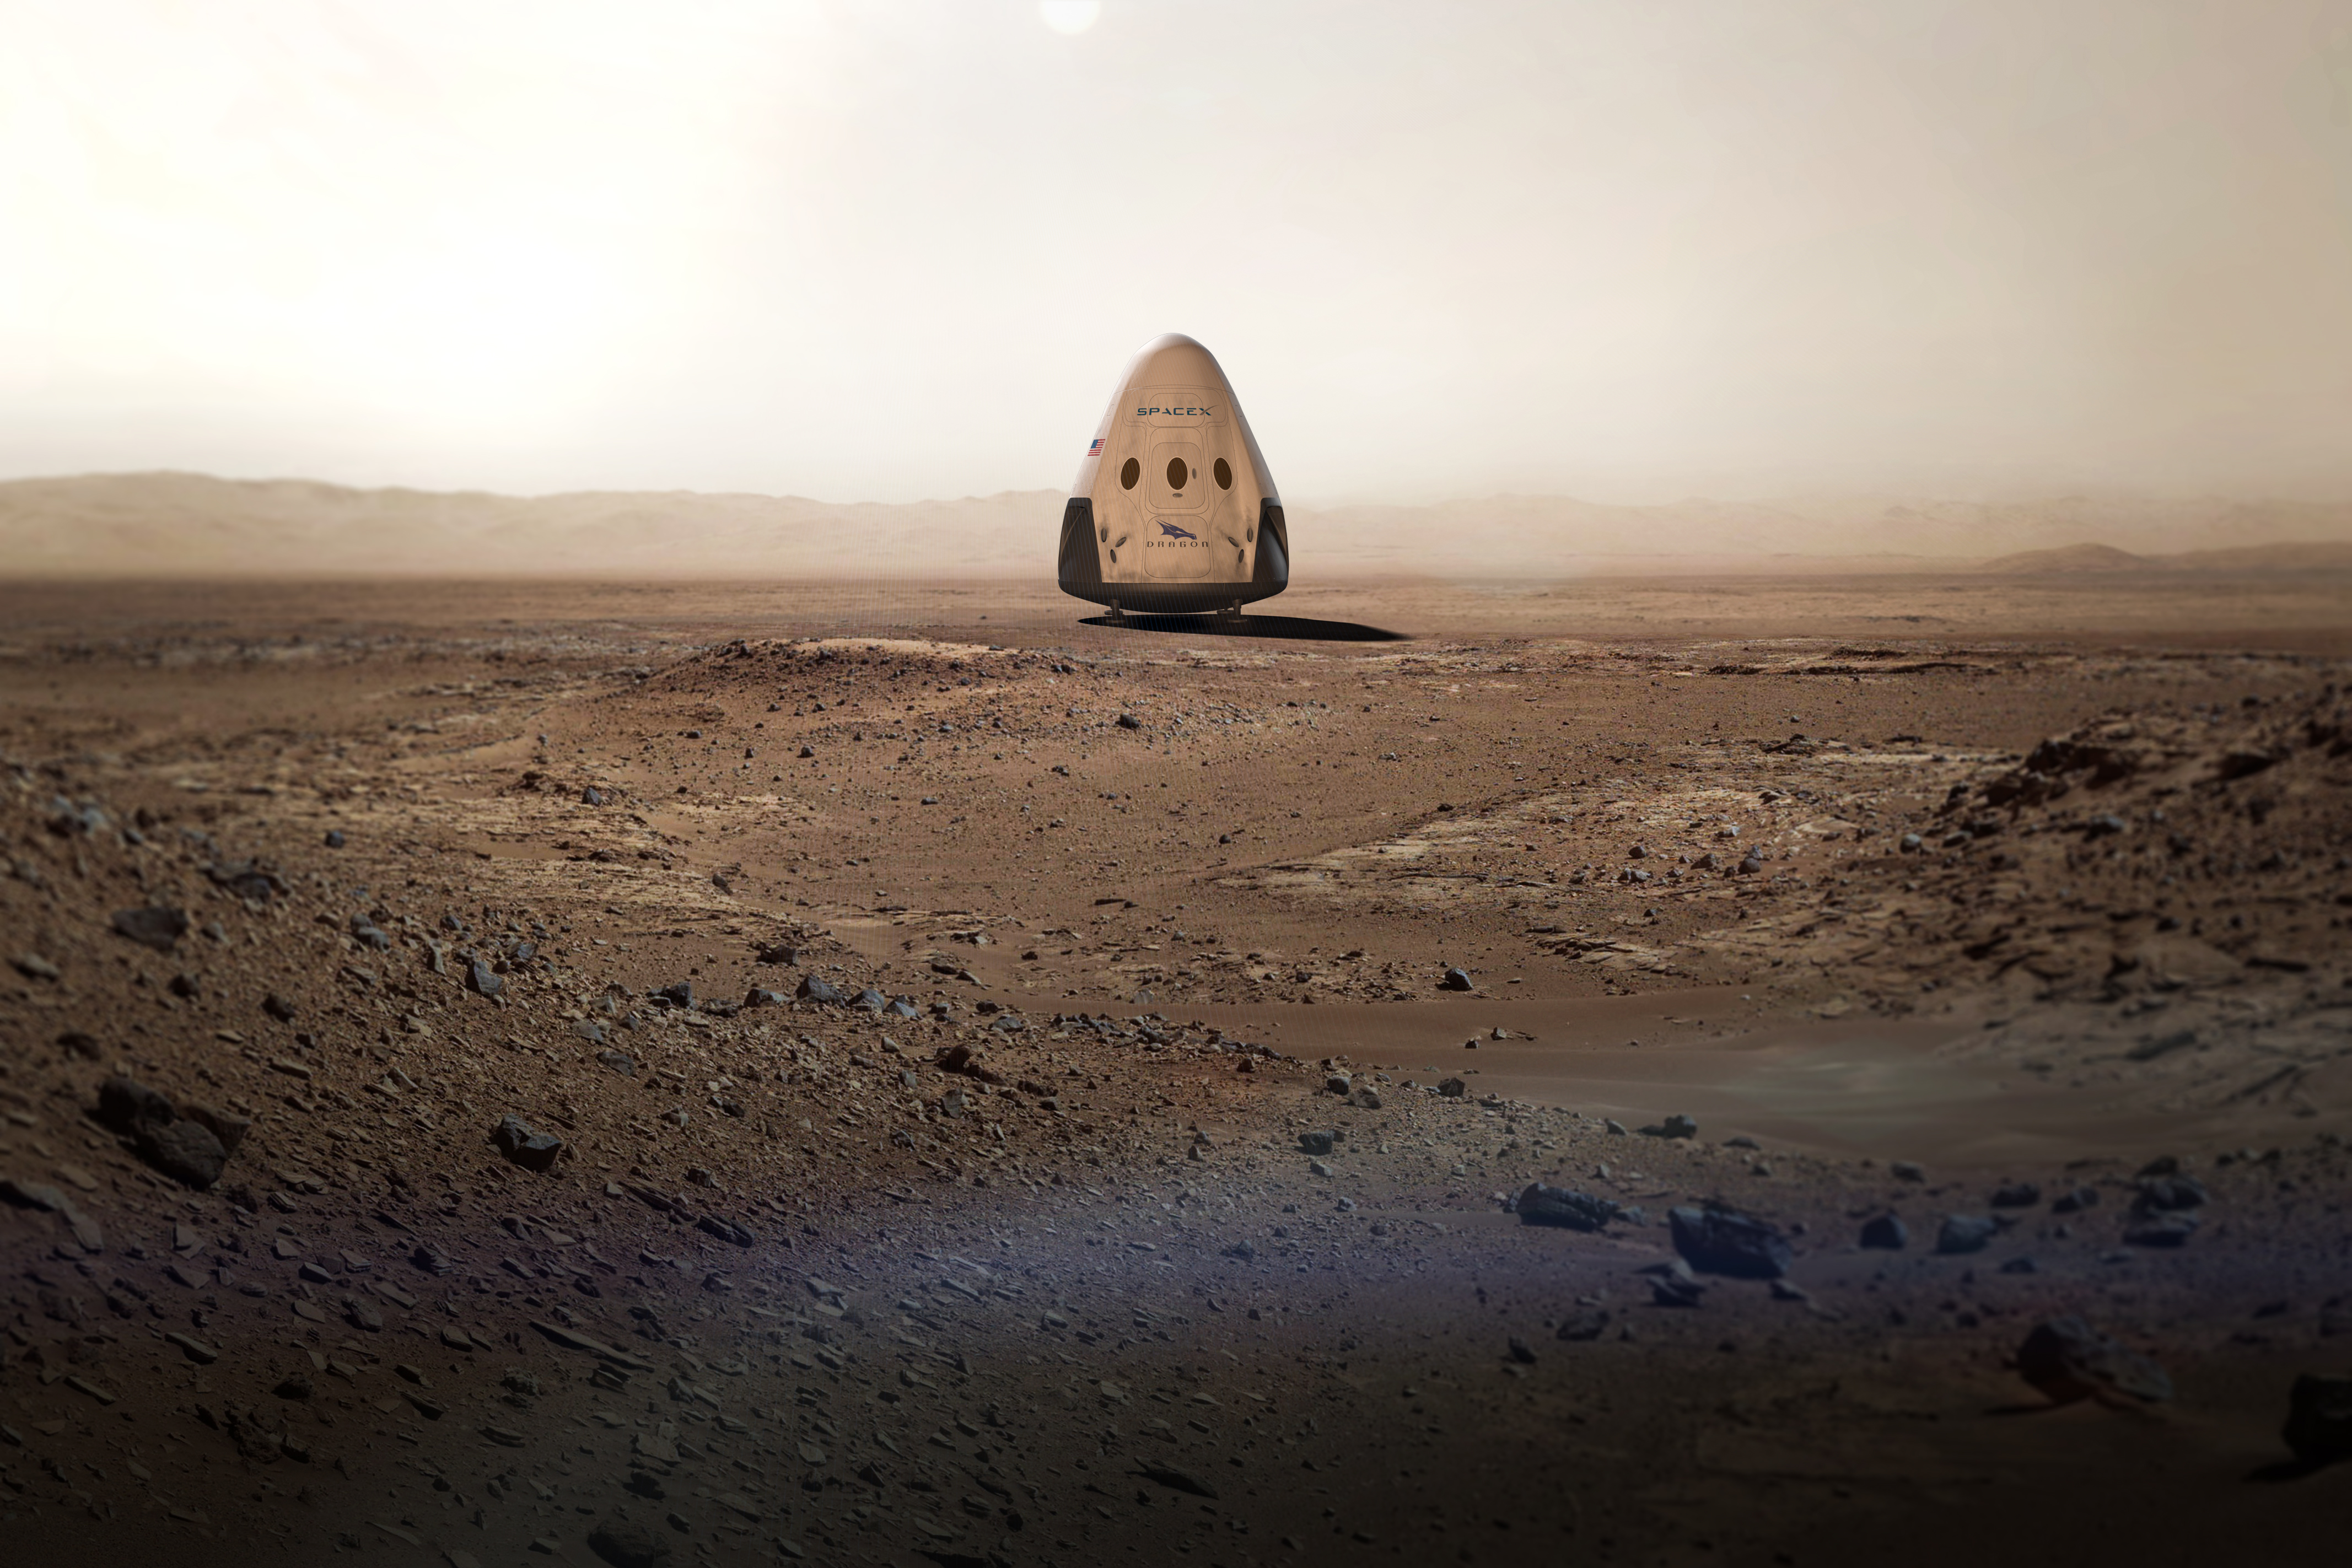 Mission (to be) accomplished: An artist's rendering of the SpaceX vehicle on Mars